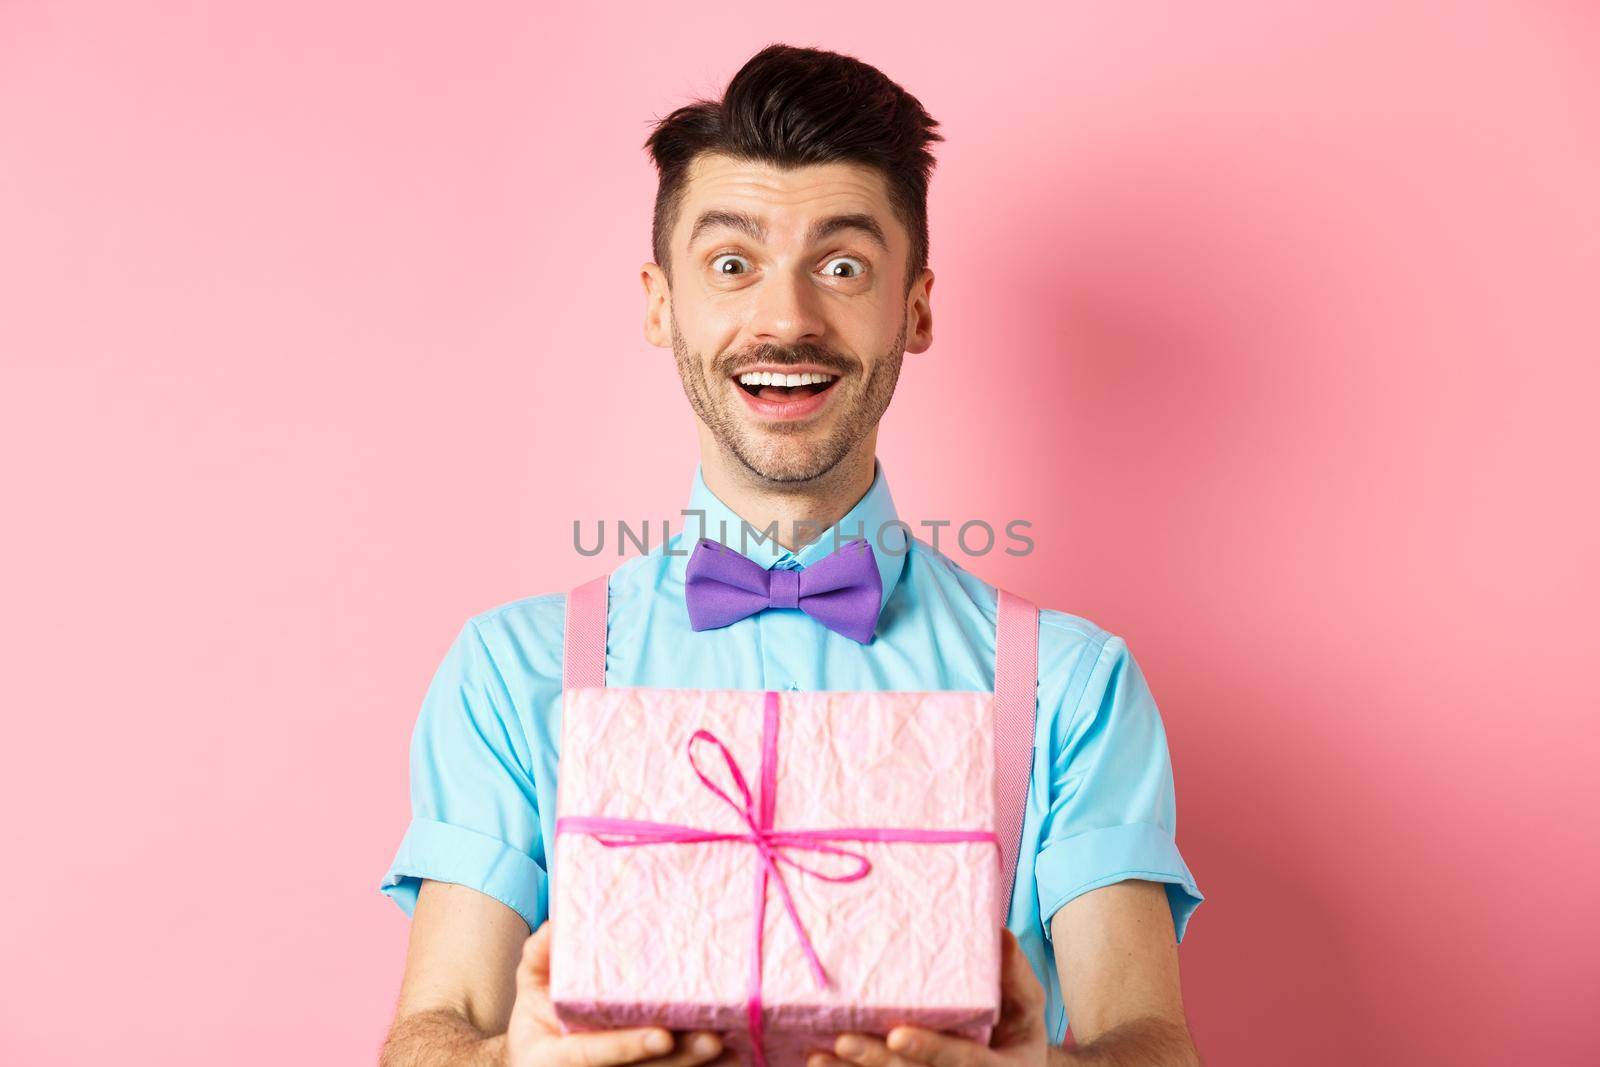 Holidays and celebration concept. Cheerful guy wishing happy birthday and giving you gift wrapped in box, standing over pink background in festive clothes.